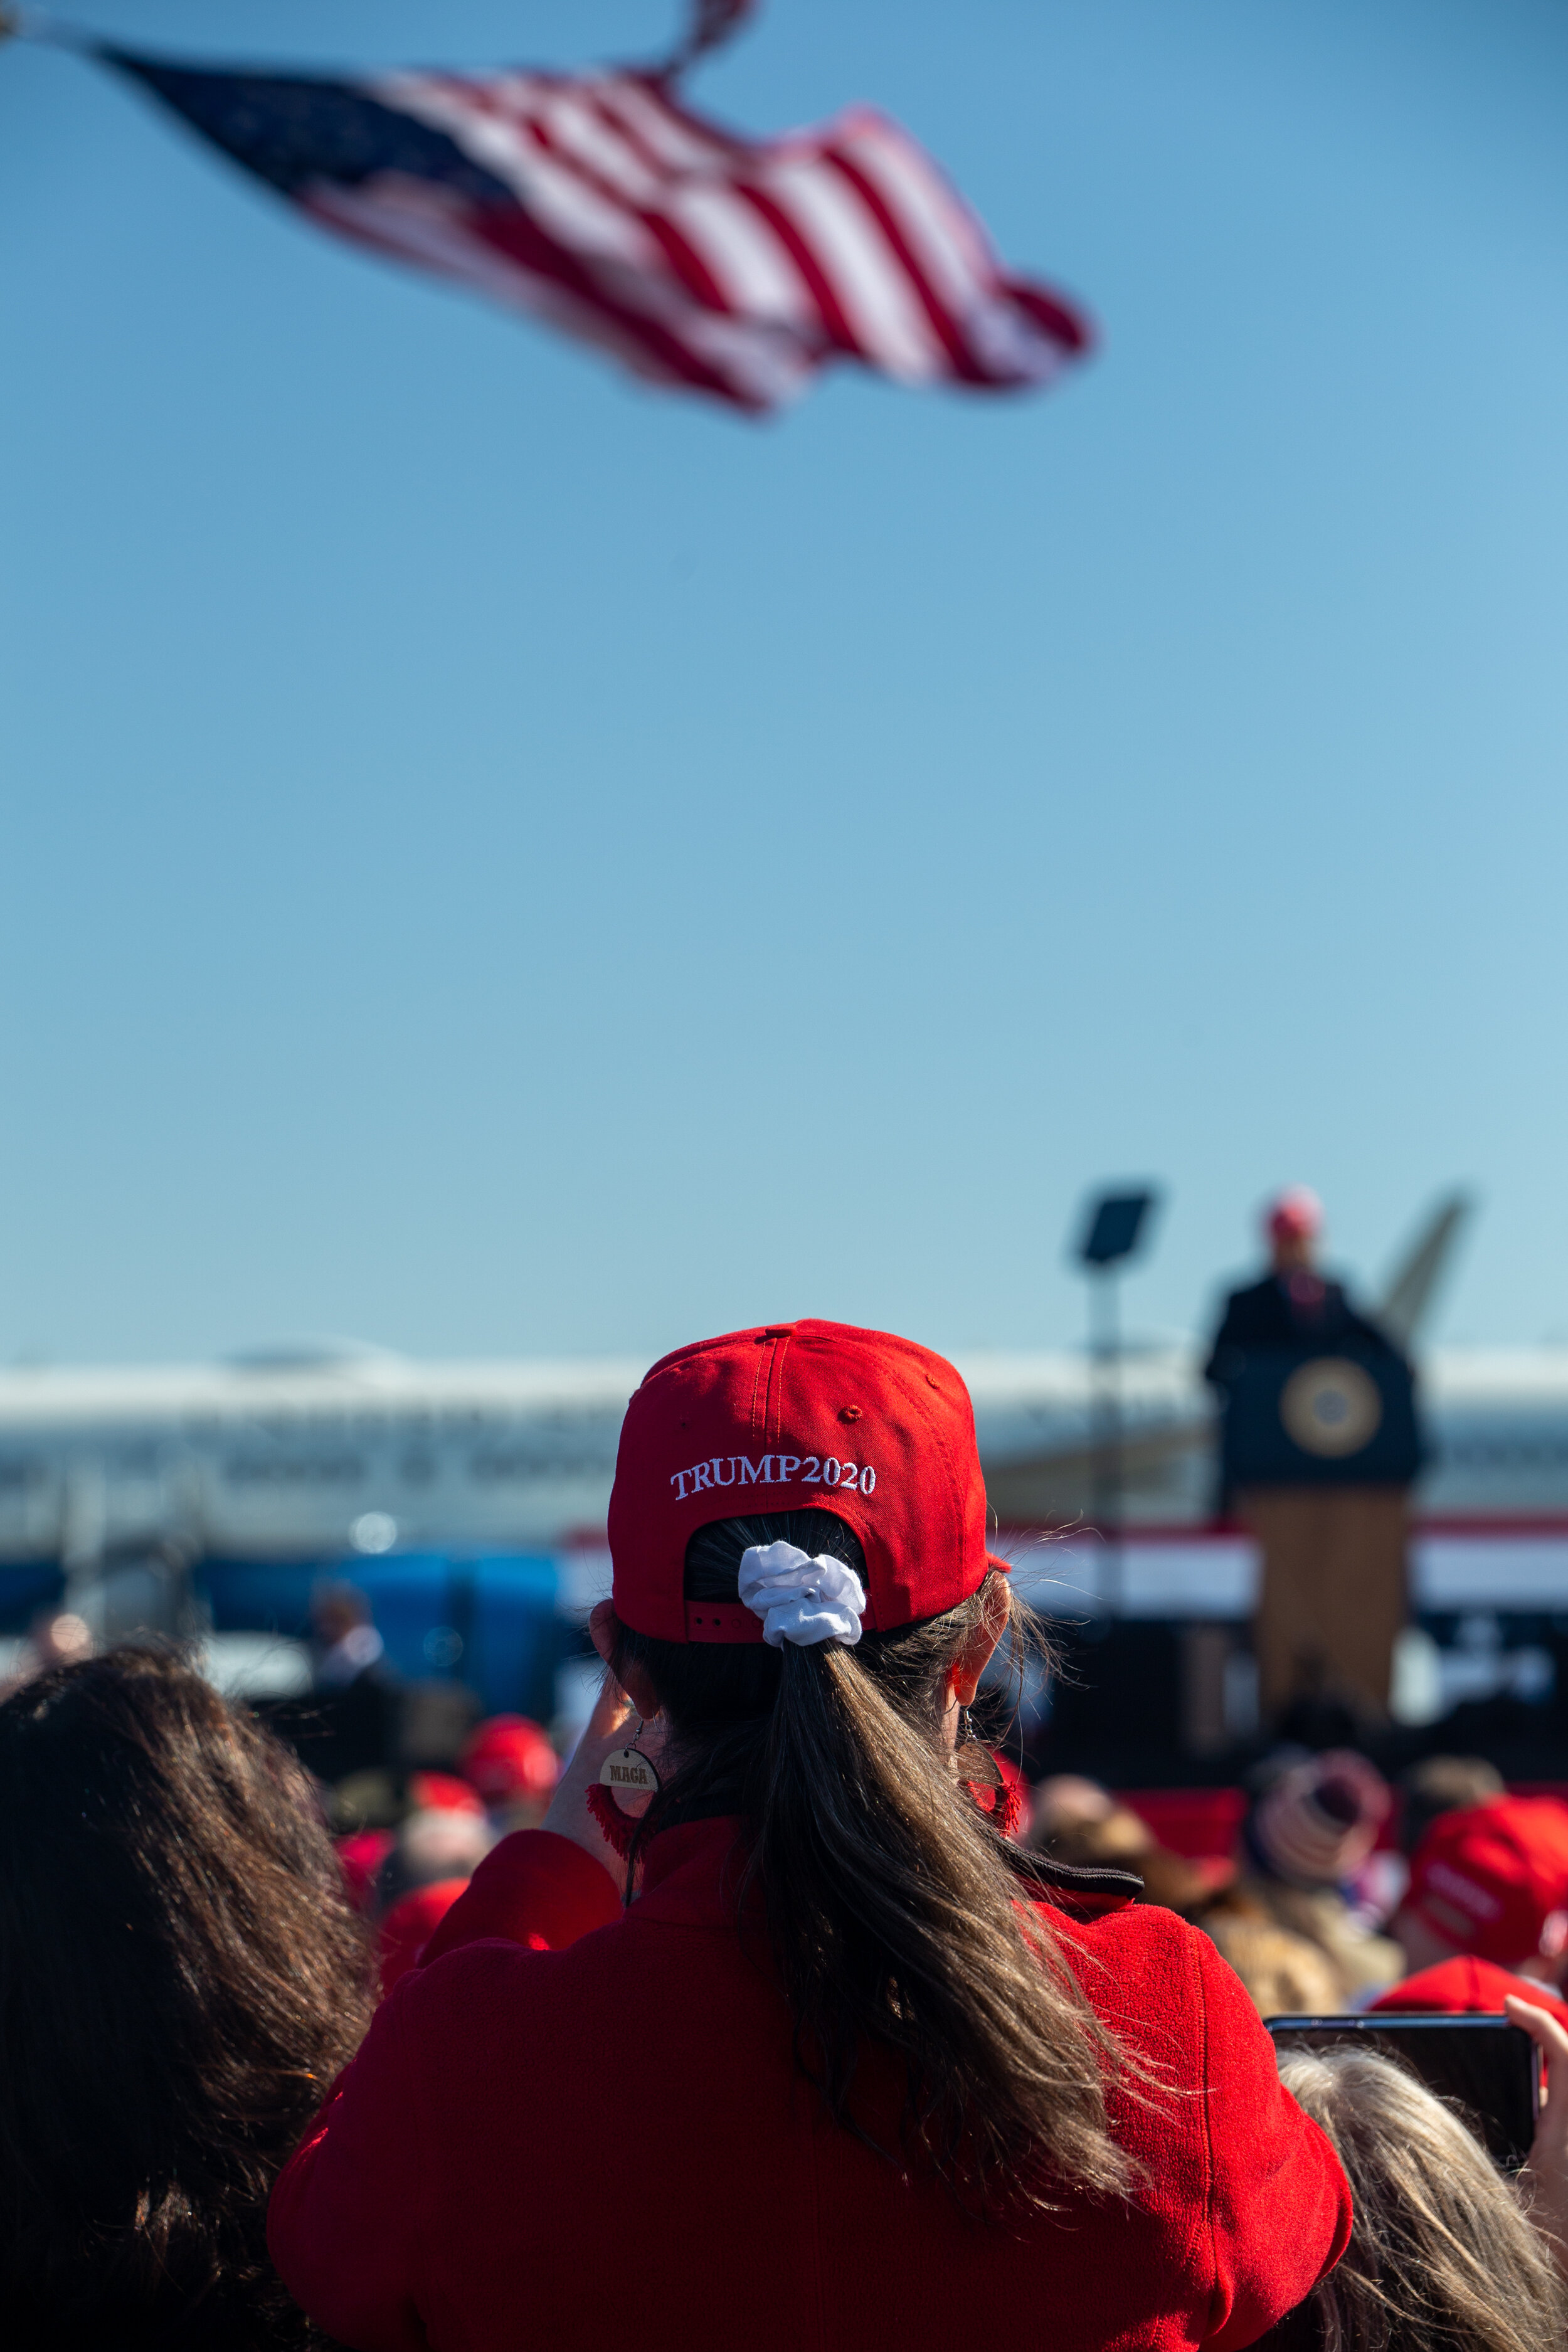  A woman watches on during a Make America Great Again rally with Donald Trump on Nov. 2, 2020 in Fayetteville, North Carolina. (For Bloomberg) 